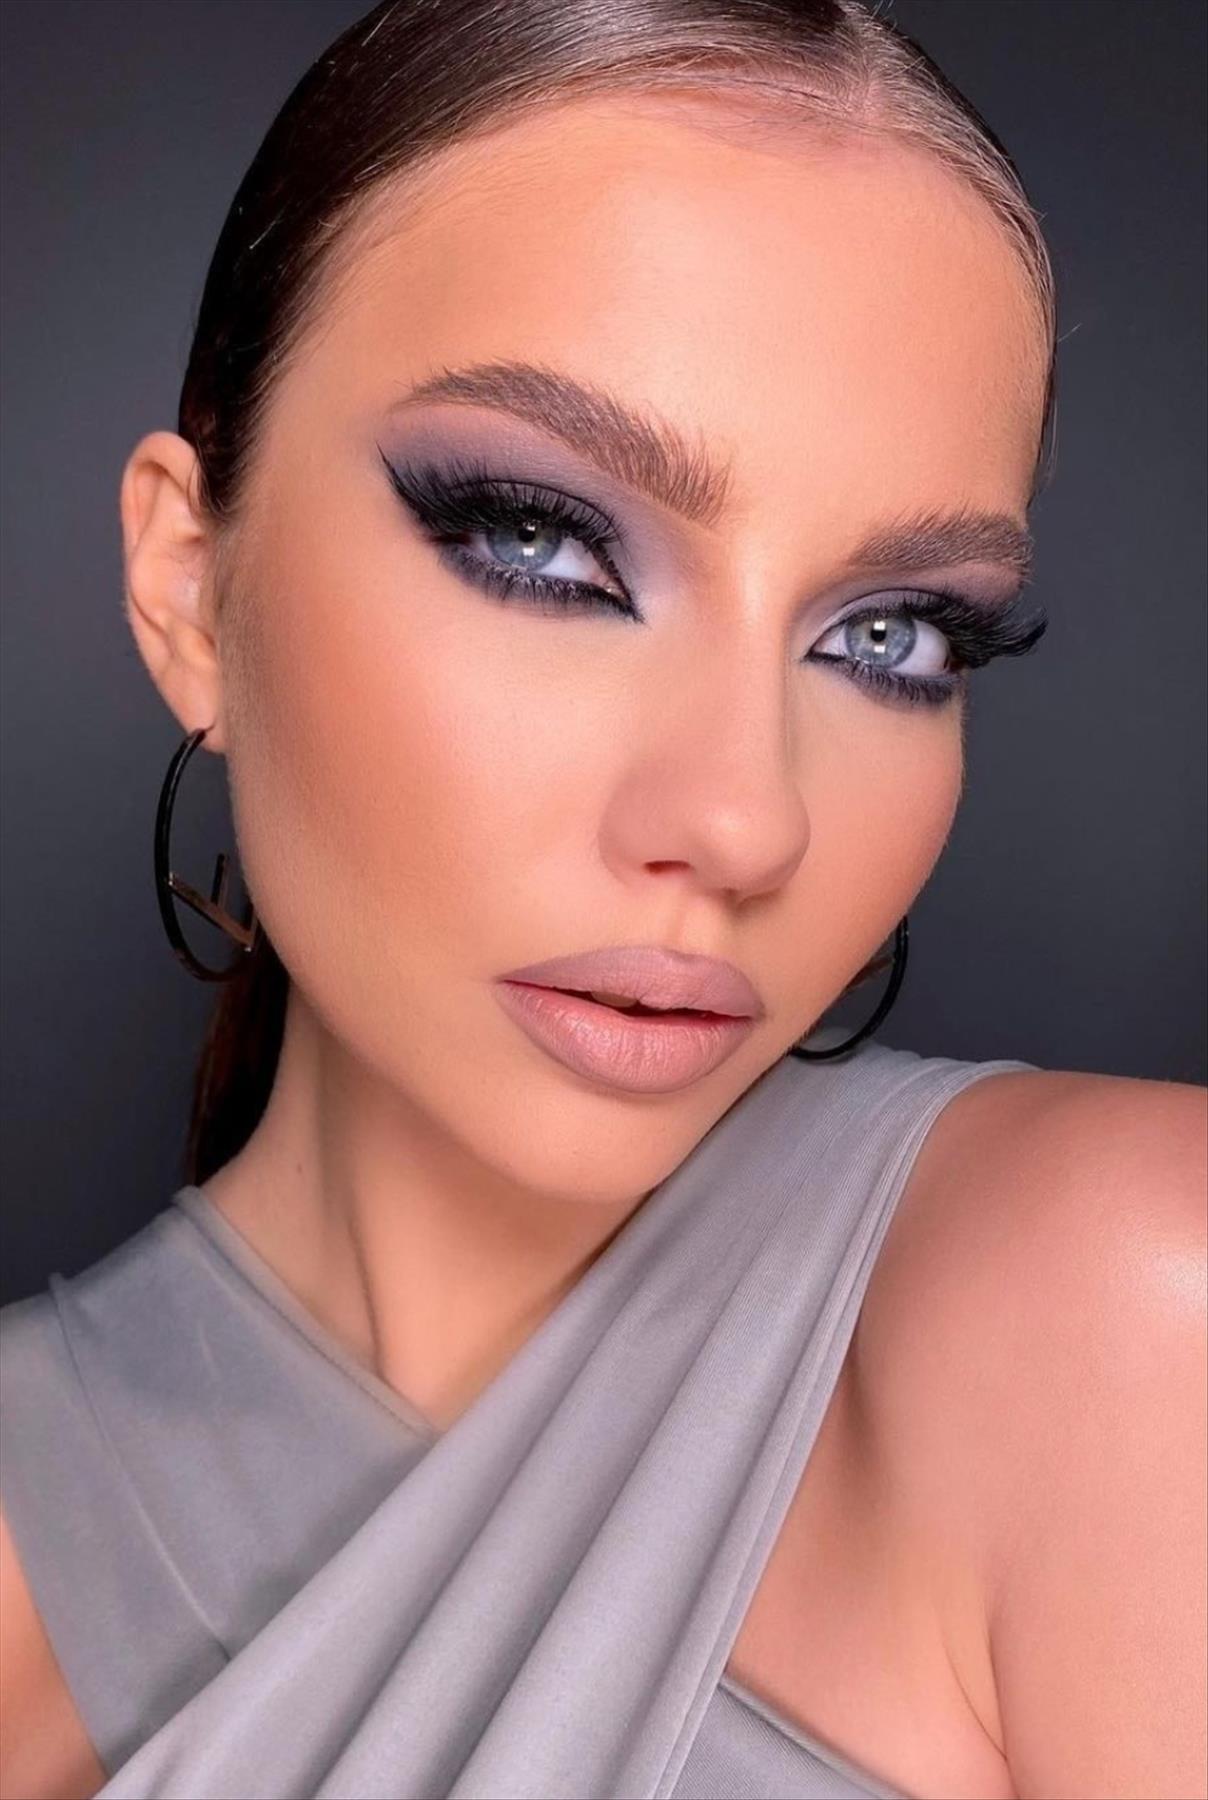 Stunning prom makeup looks trends perfect for prom night